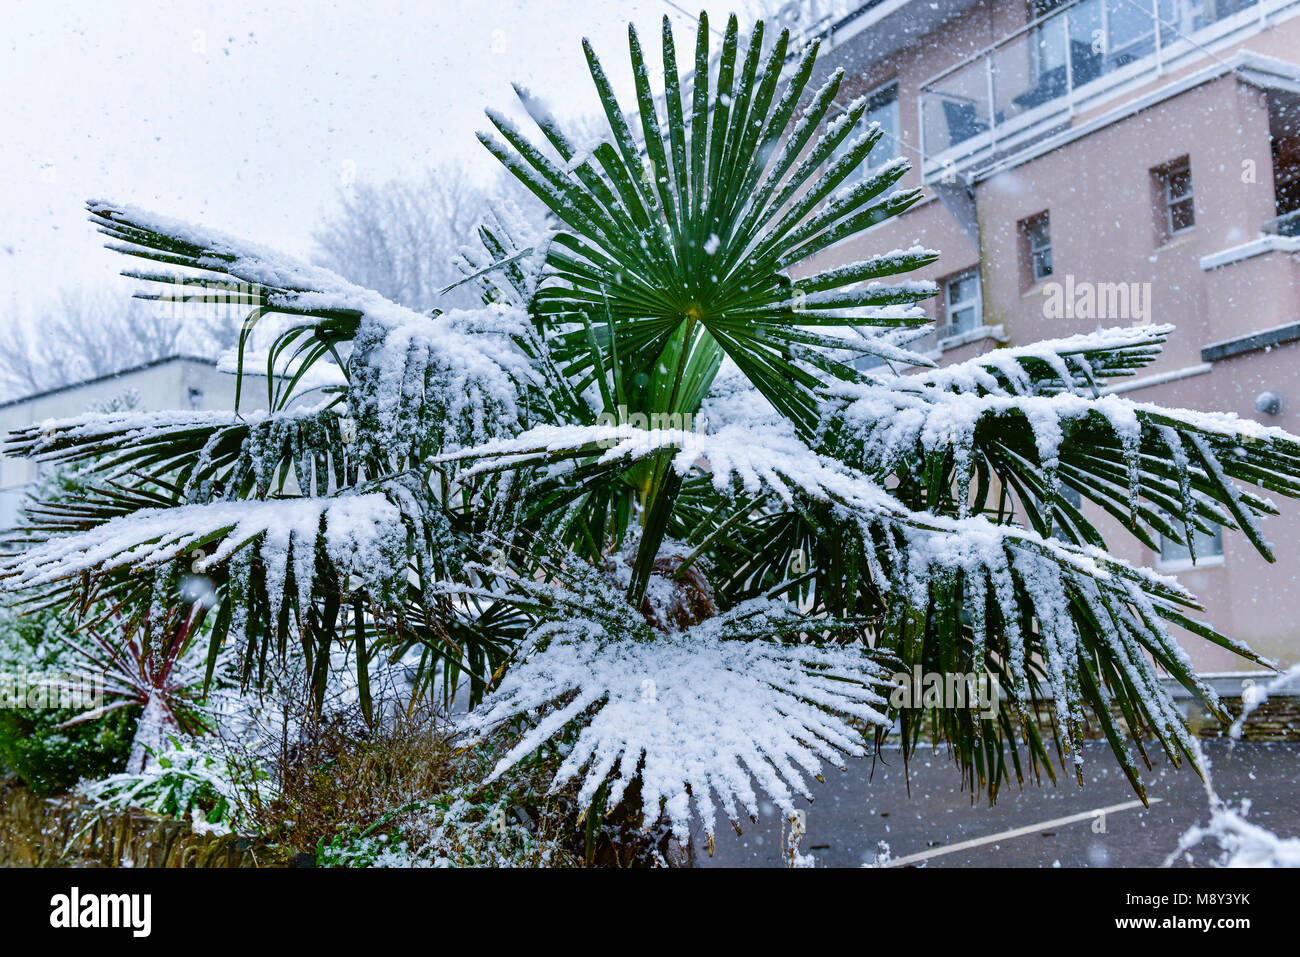 Unusal weather conditions in Cornwall with snow falling on Trachycarpus fortunei Chusan Palm in Newquay Cornwall. Stock Photo